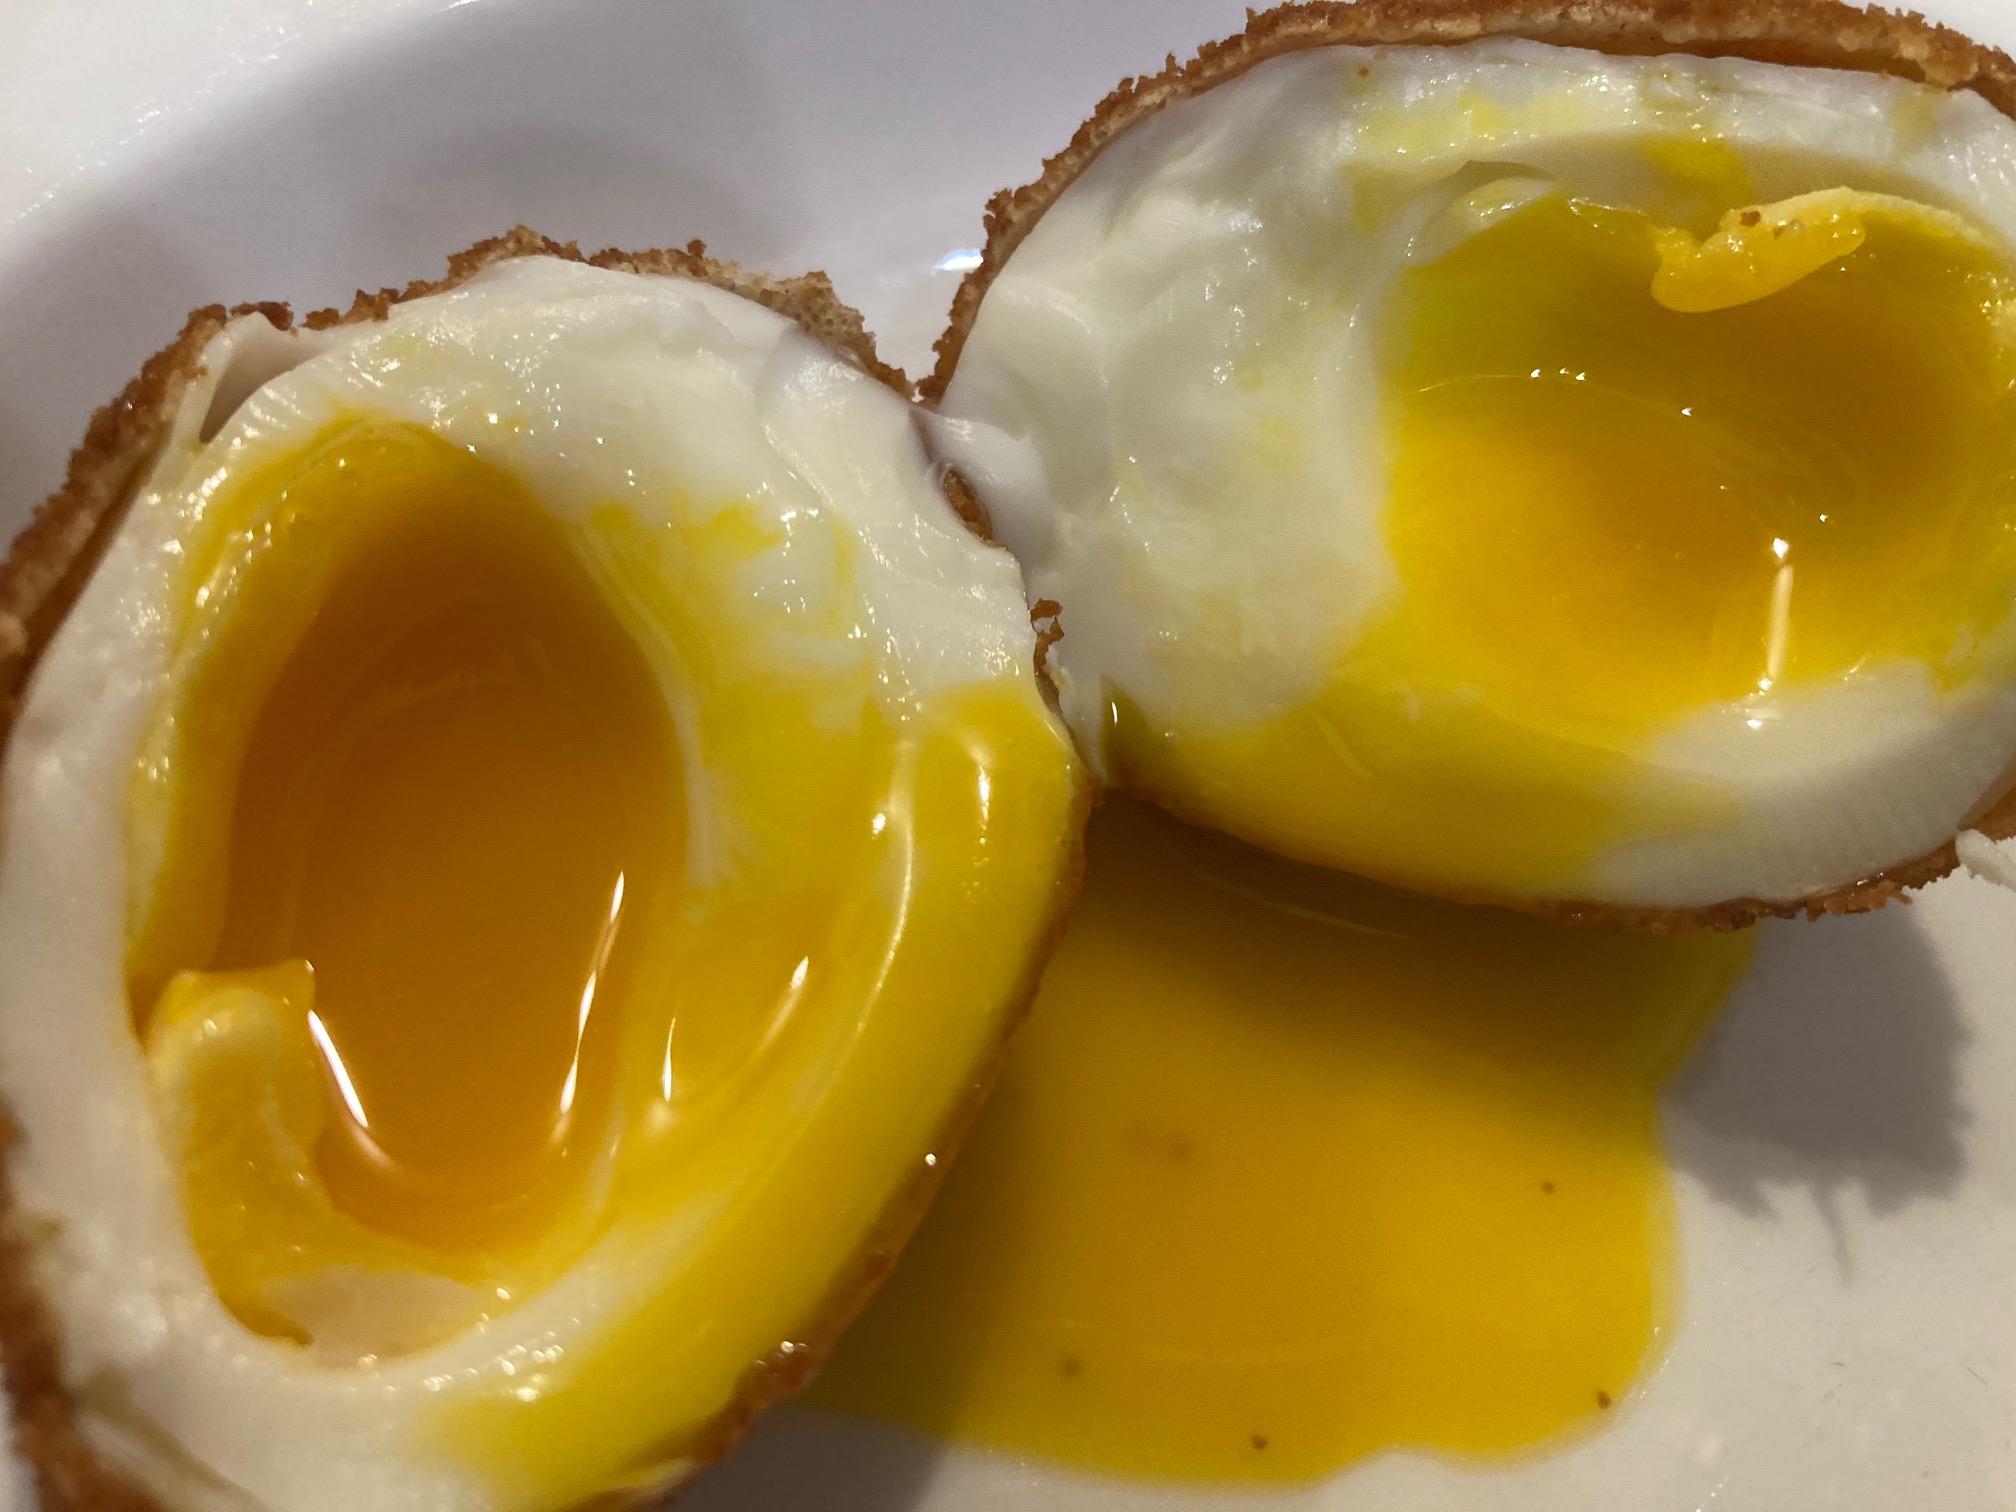 Technique: Fried egg soft as wax